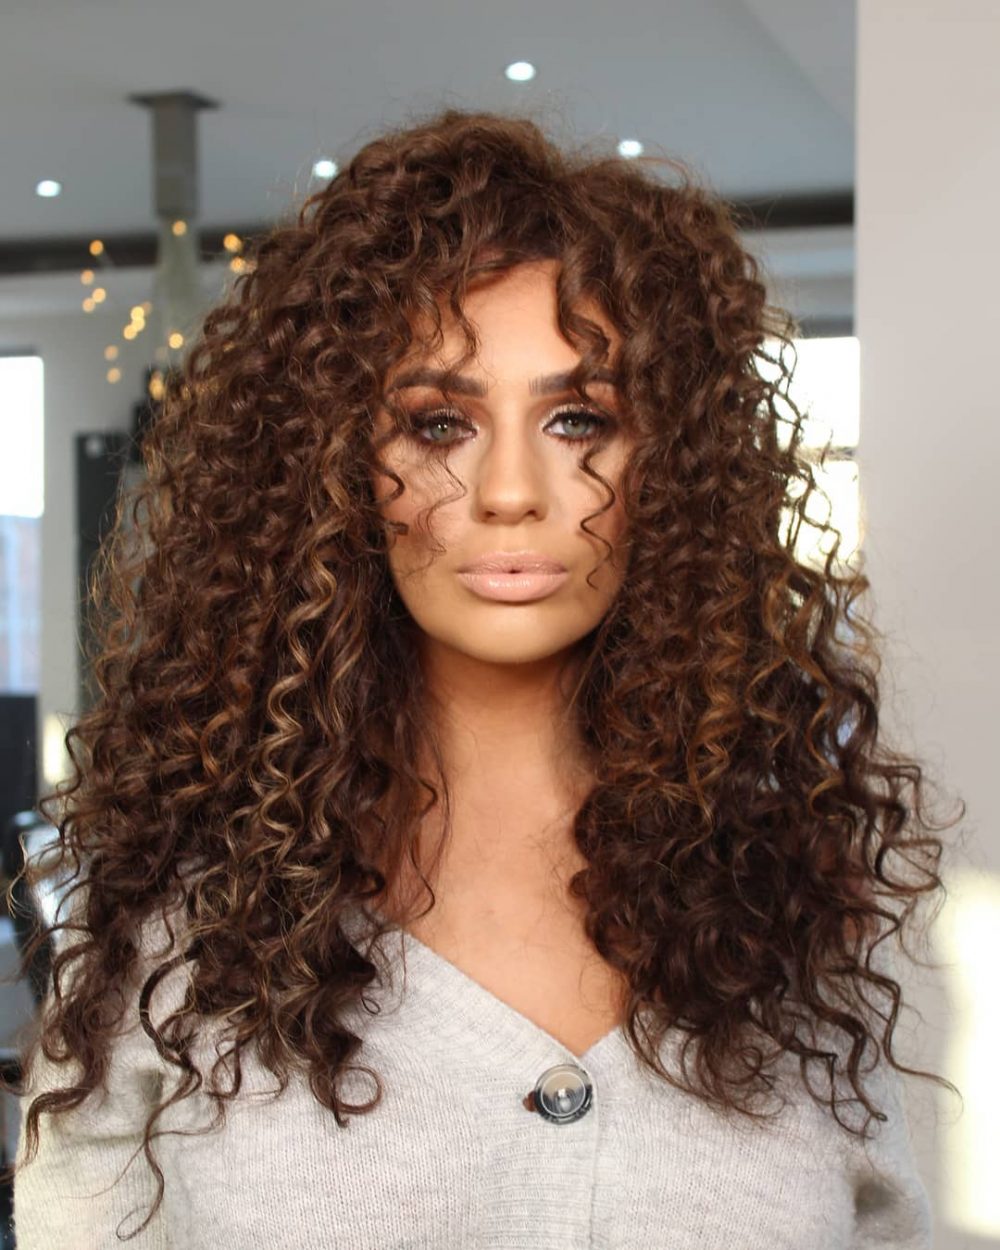 Hot Curly Weave with Long Bangs